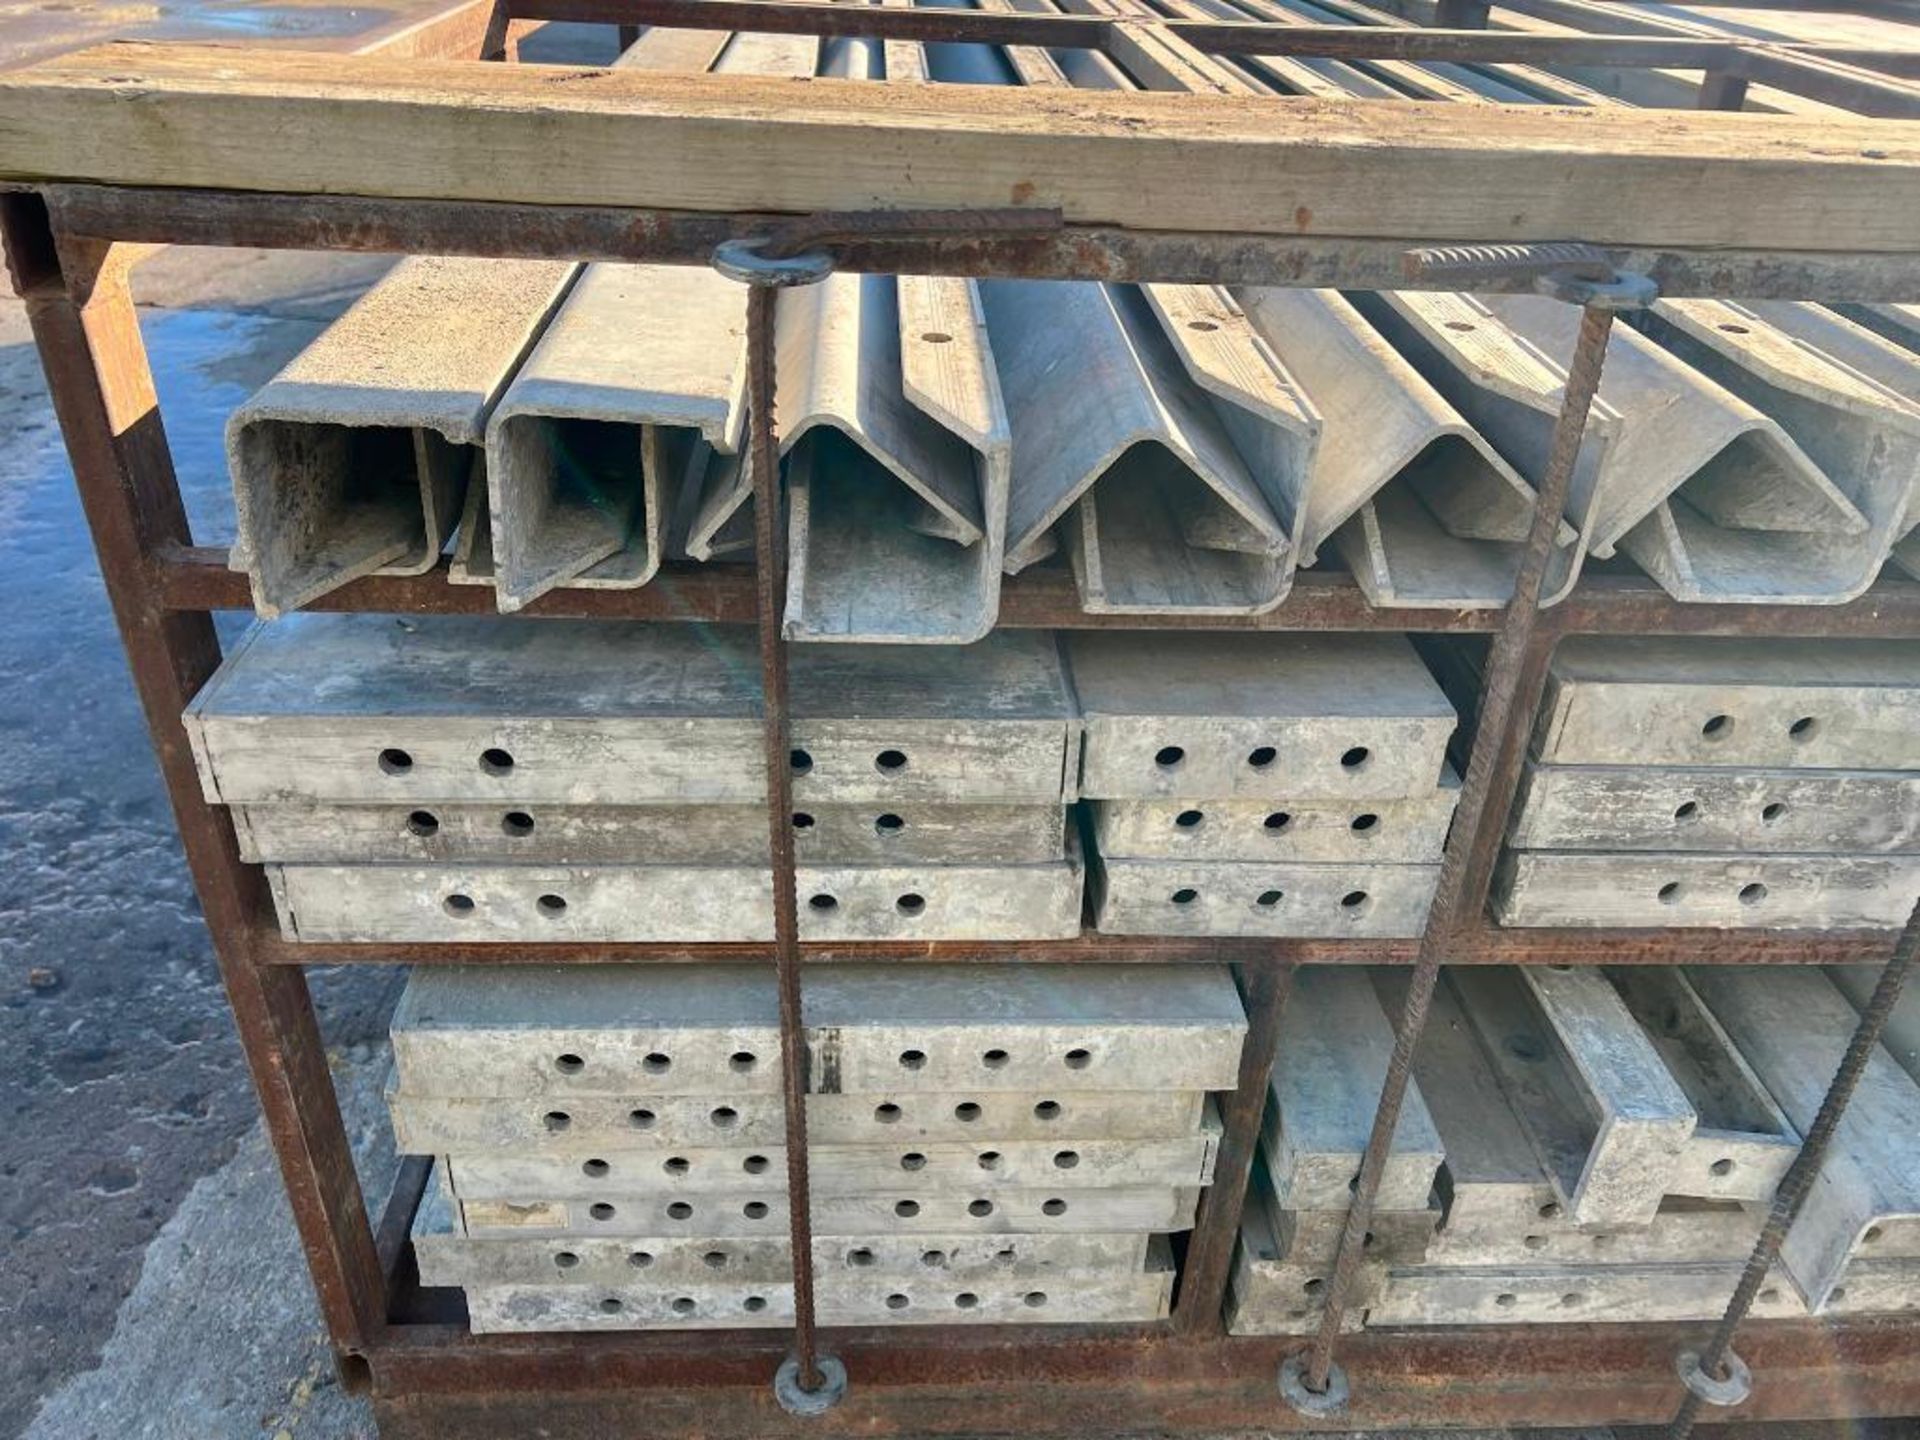 Lot of Wall-Ties Smooth Aluminum Concrete Forms. (220) 2' x 14' and 3' x 8' x 14' Filler Cage to Inc - Image 18 of 23